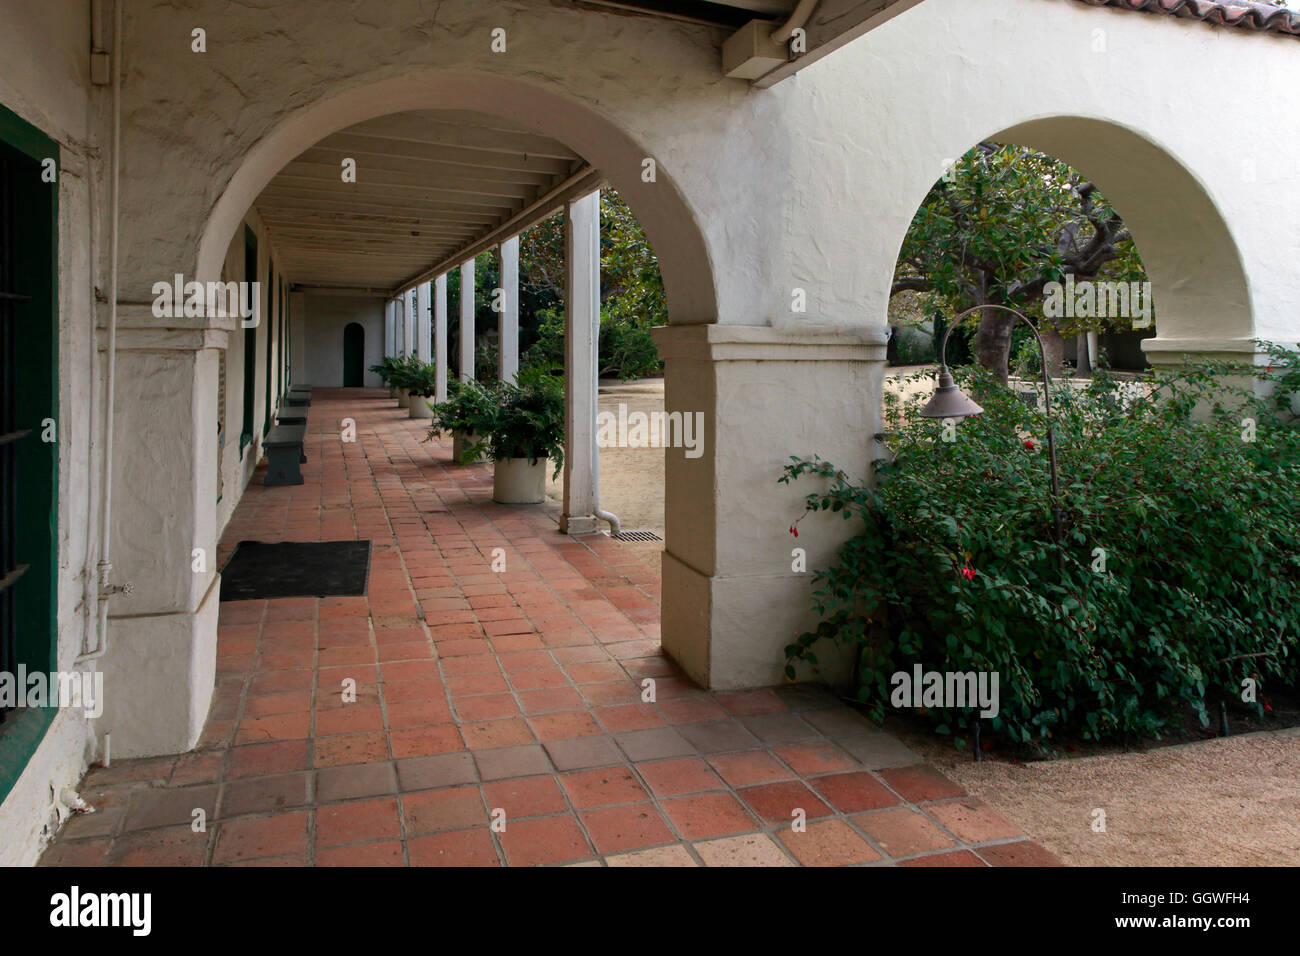 The courtyard of the historic PACIFIC HOUSE - MONTEREY, CALIFORNIA Stock Photo